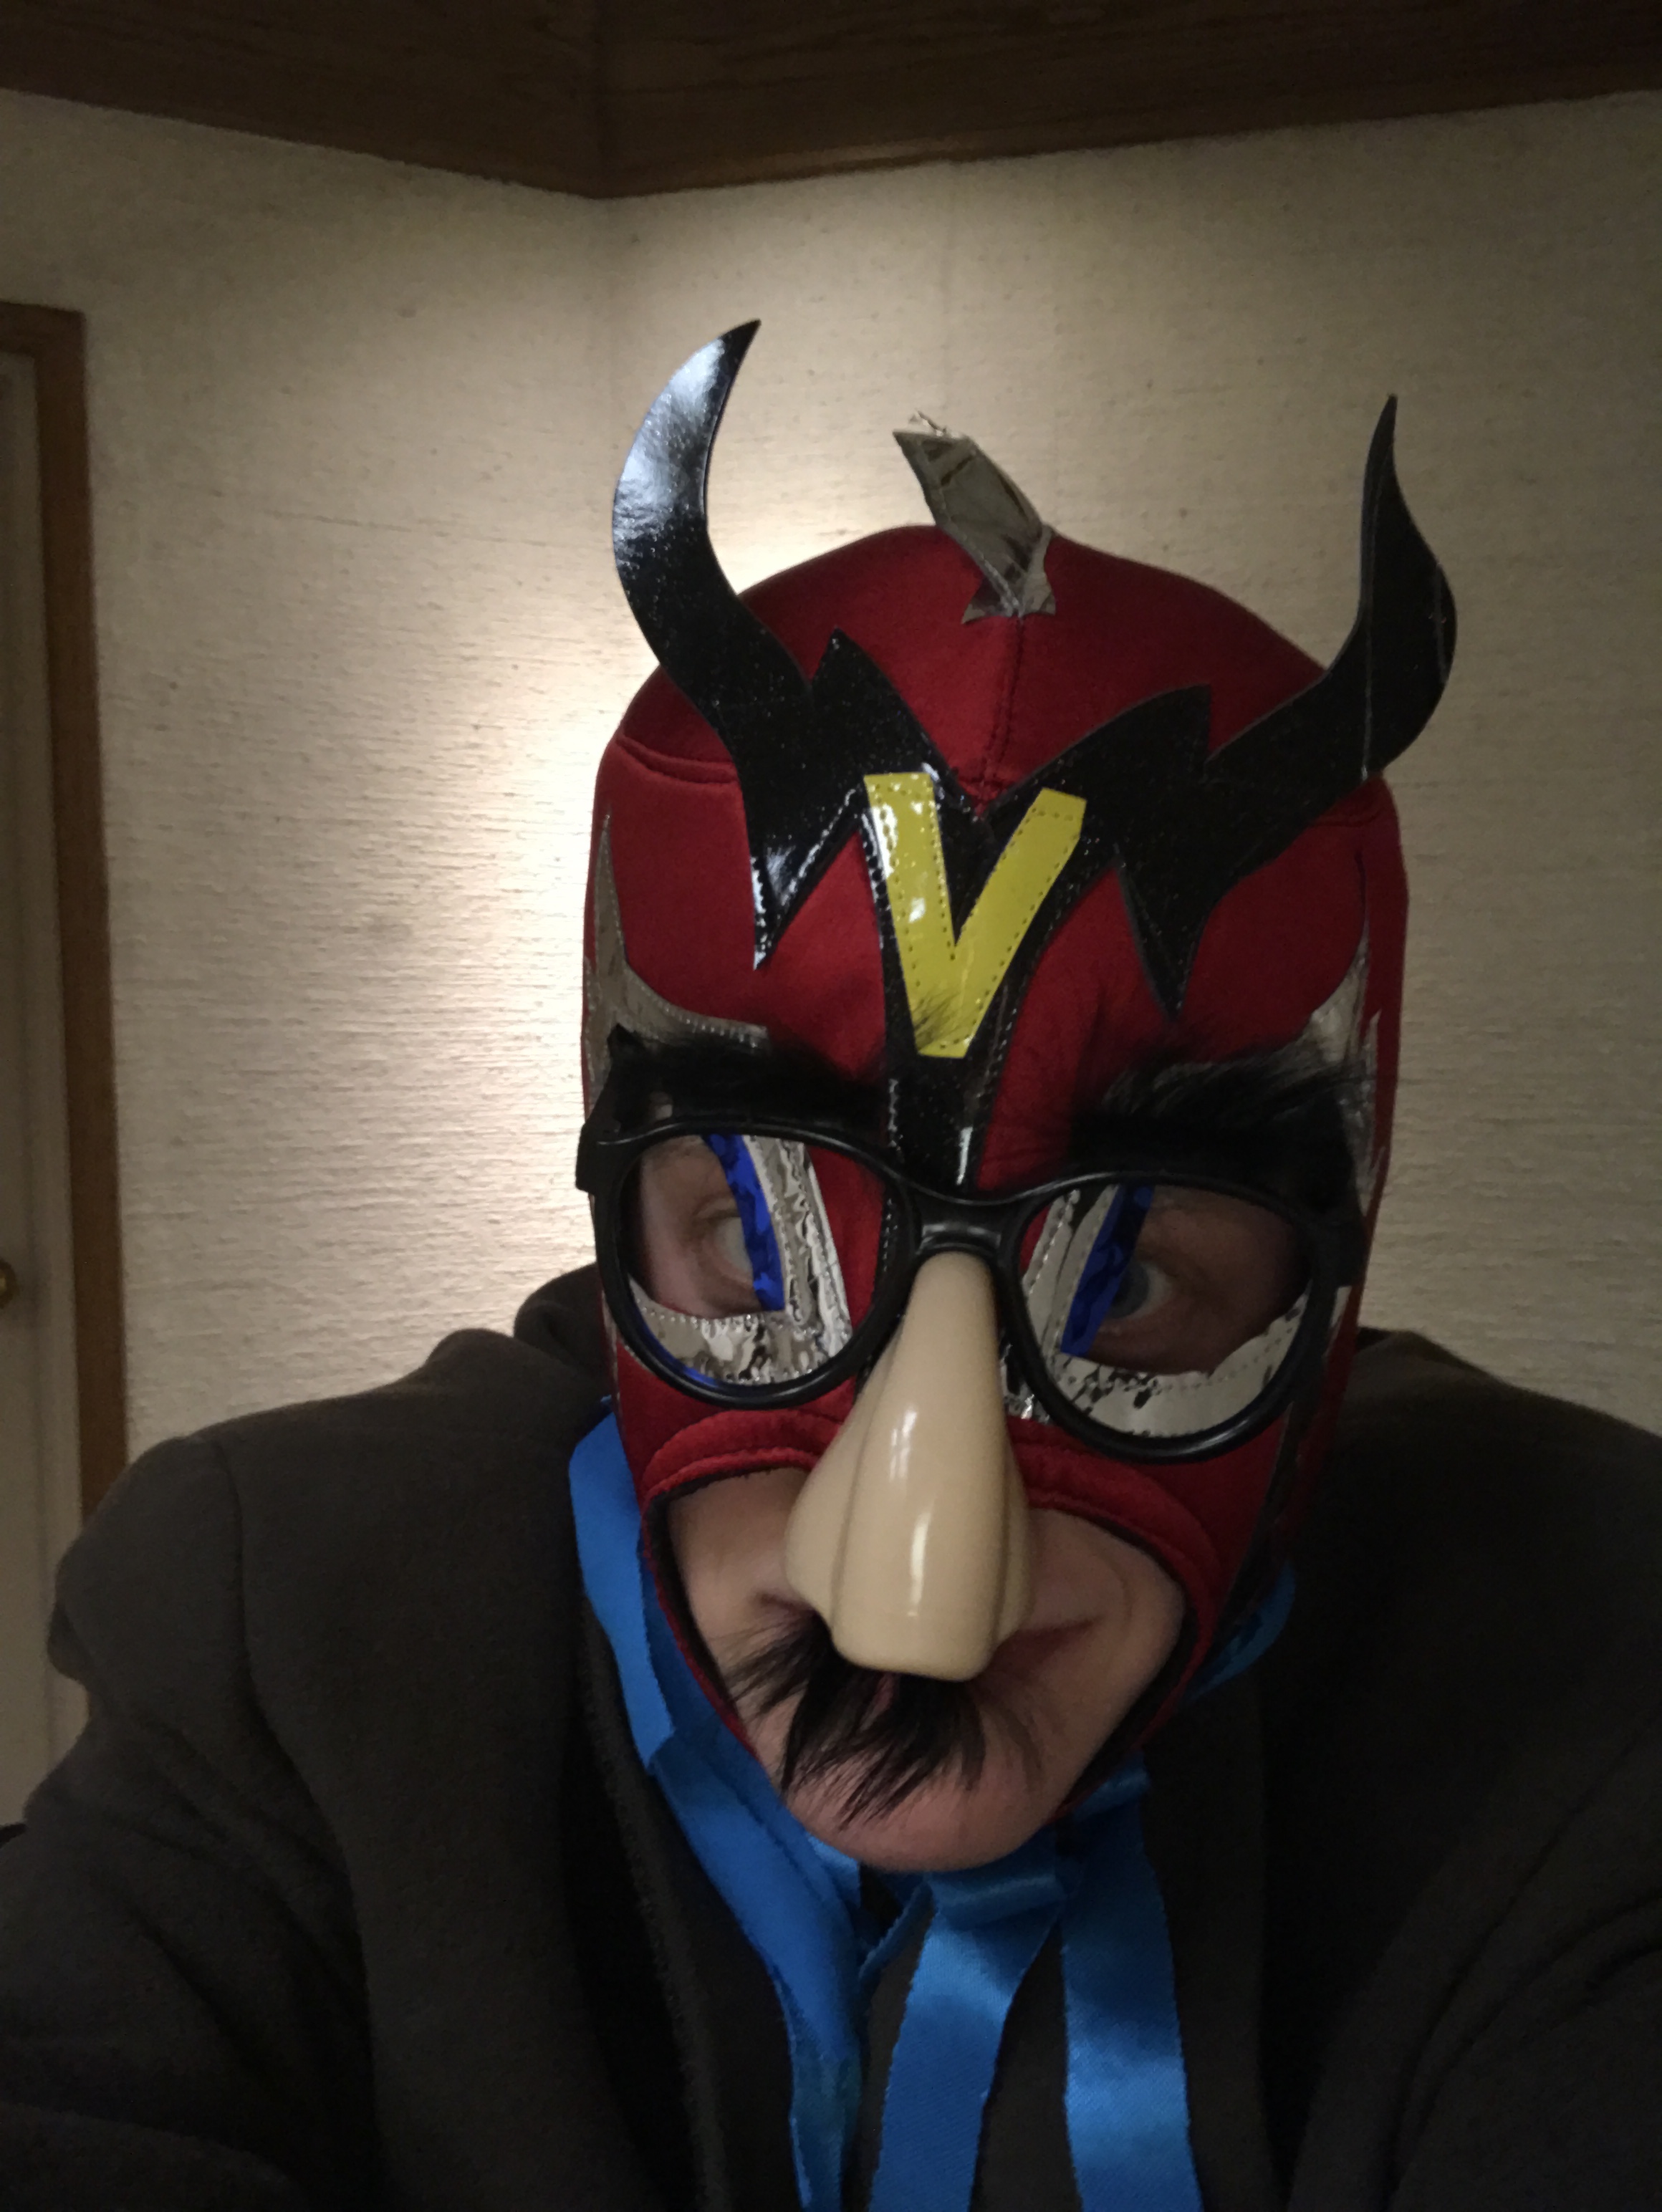 Me wearing a Mexican wrestler mask and Groucho Marx glasses. I look very cool.